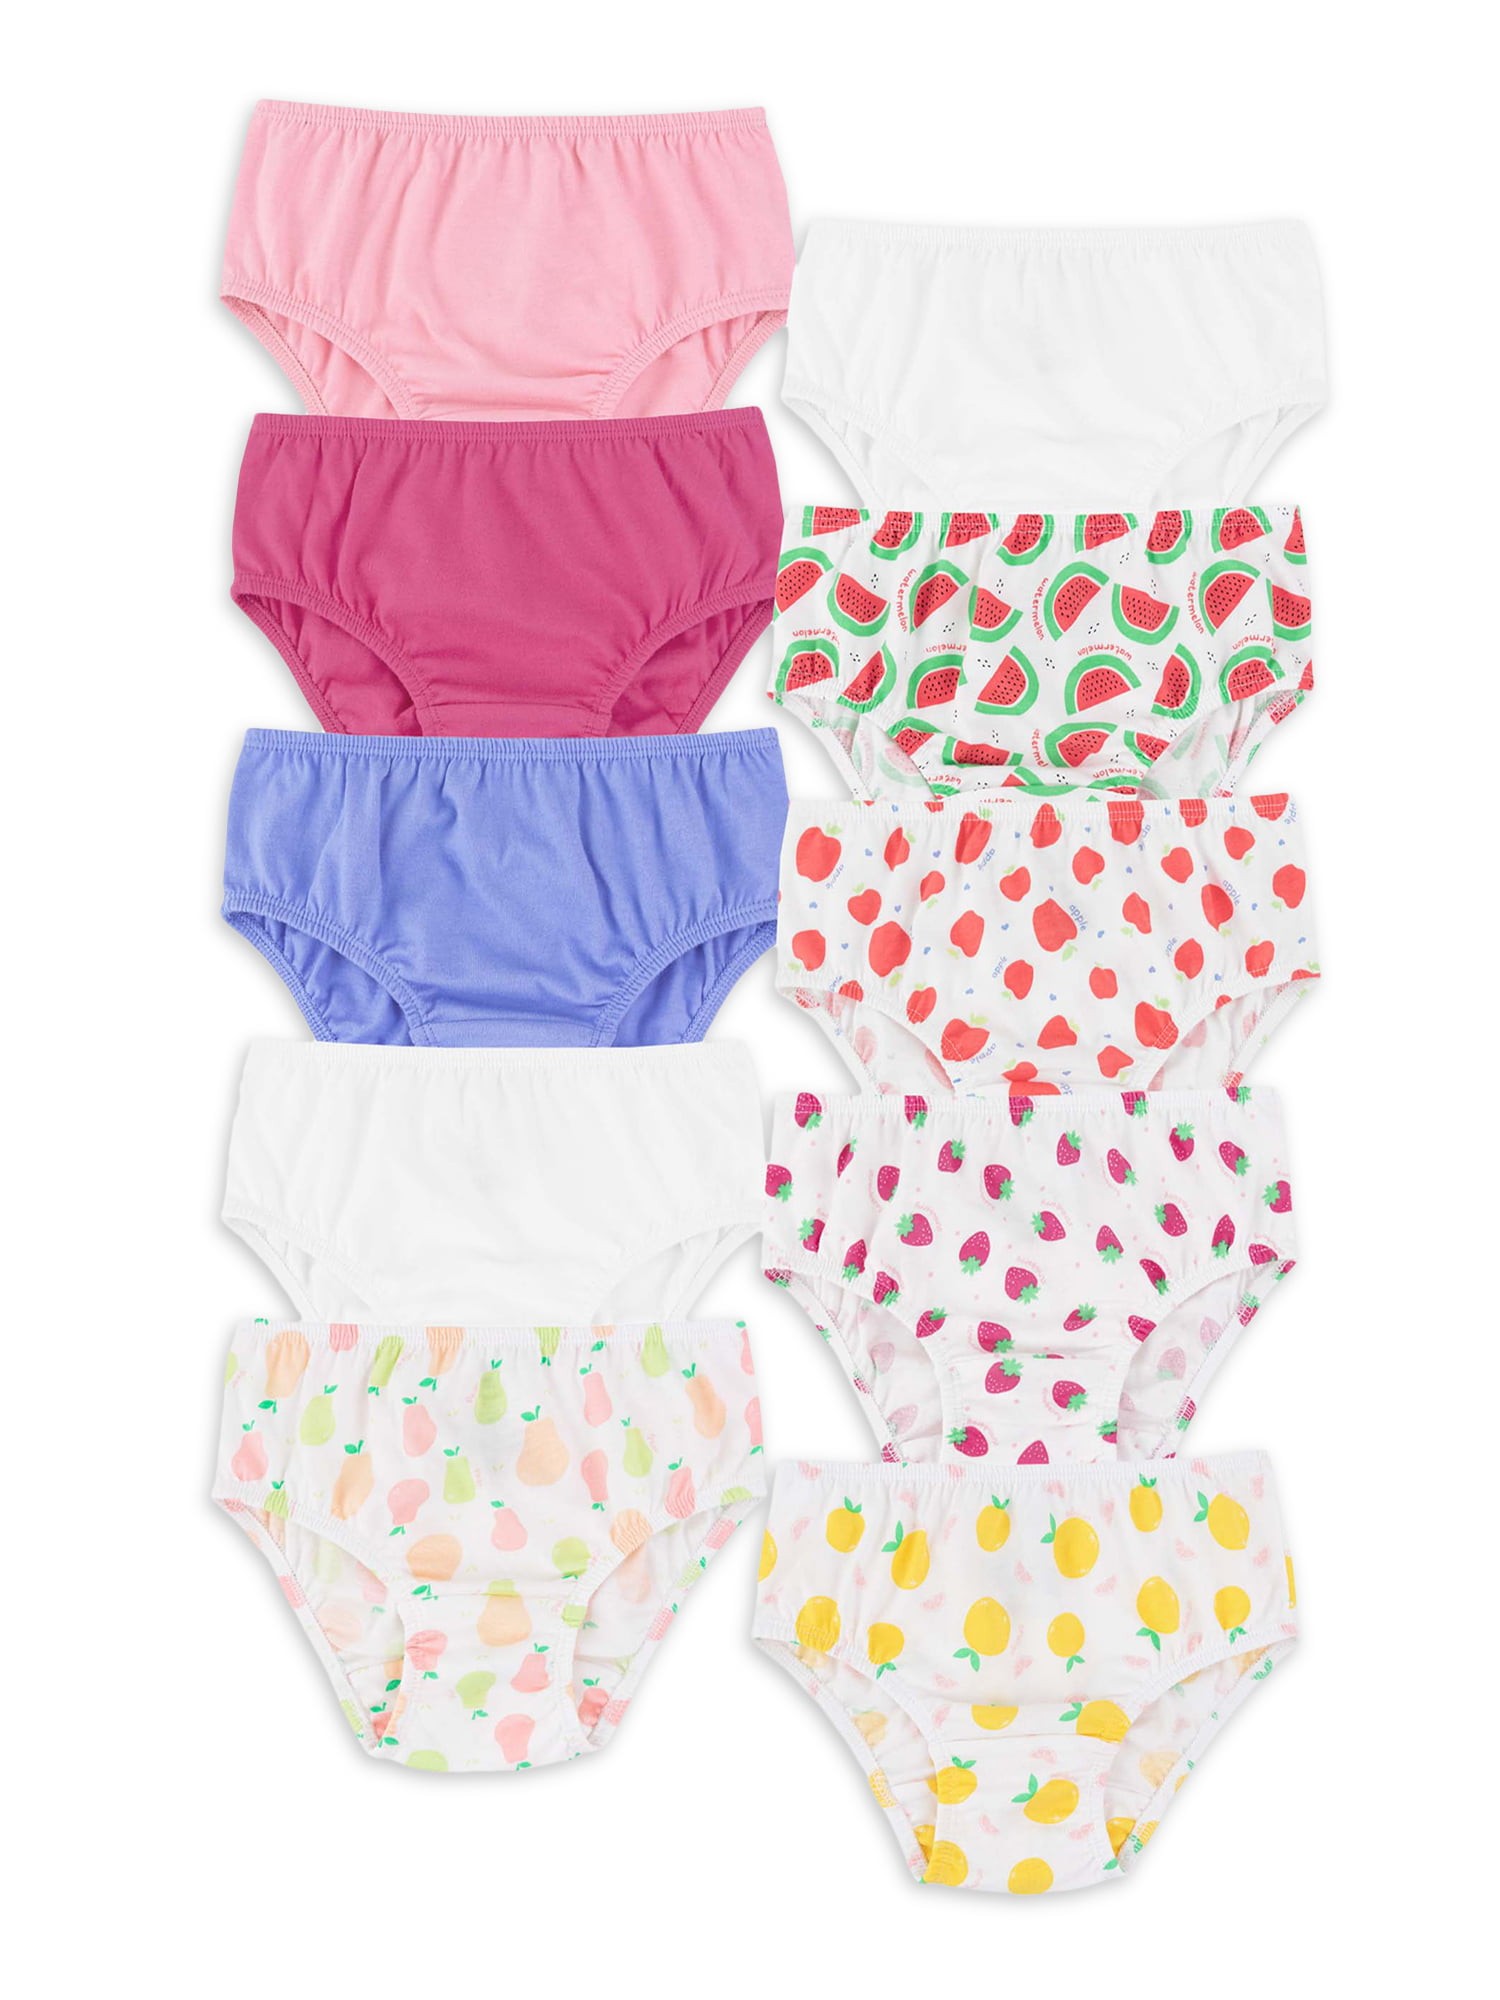 Hanes Toddler Girl Hipster Panty, 6 Pack, Sizes 2T-5T 